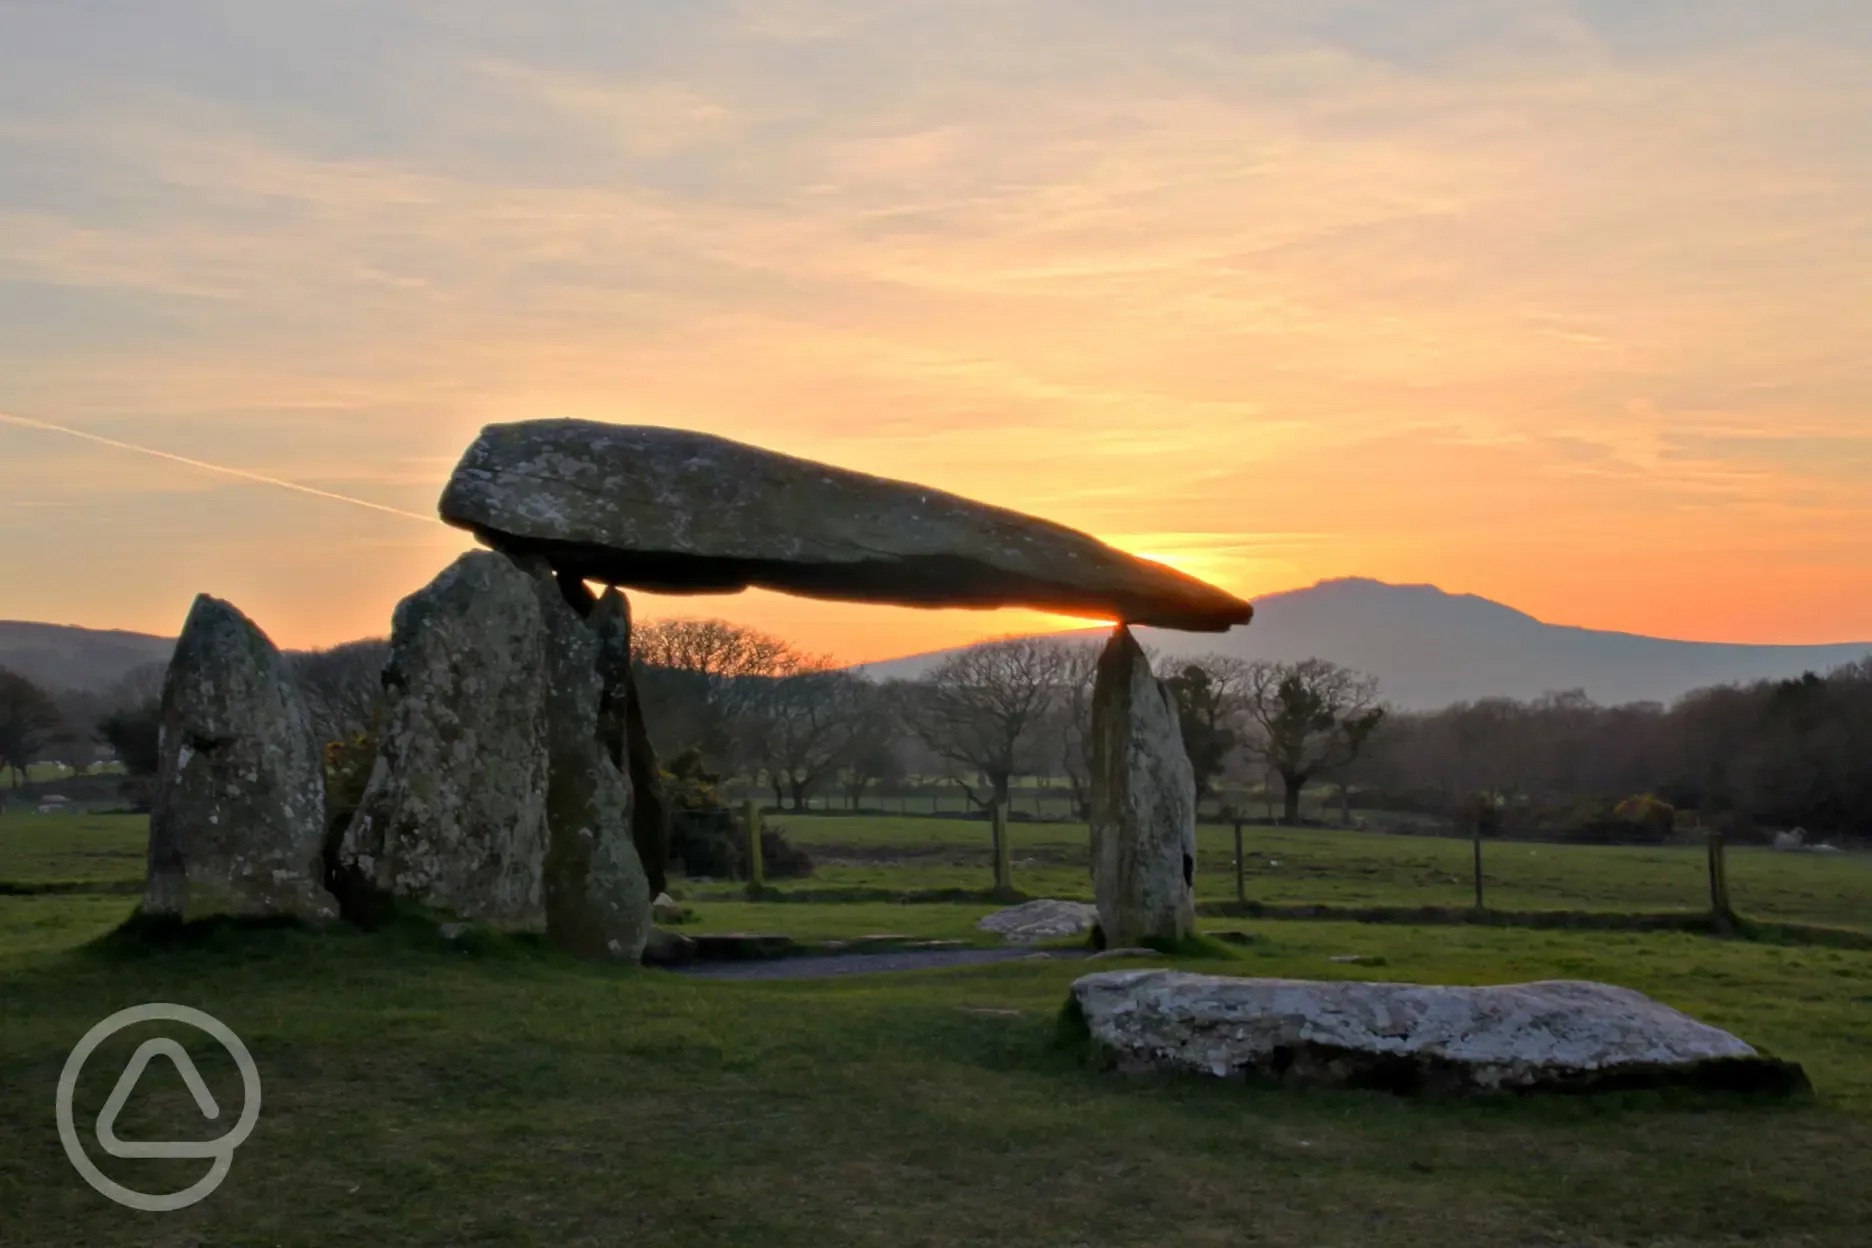 Pentre Ifan, lots of things to do and see in the area